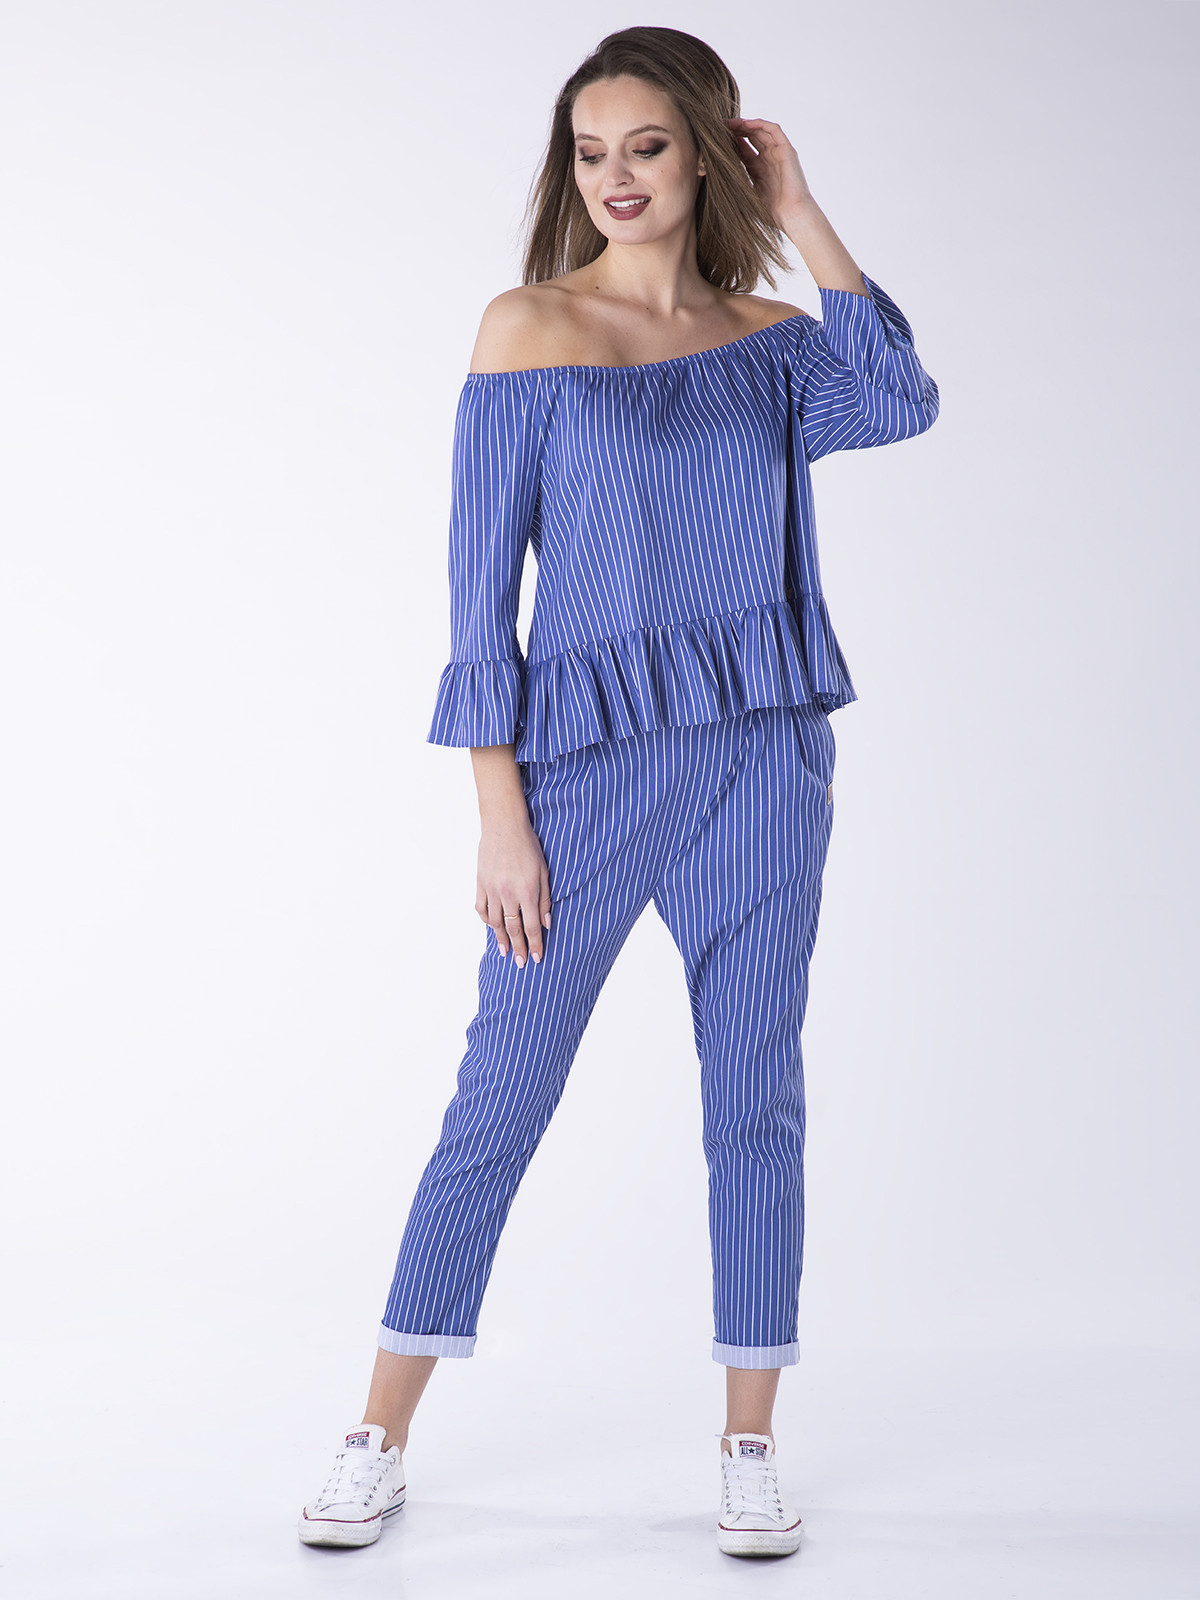 Look Made With Love Kalhoty 415P Stripe Blue/White XS/S